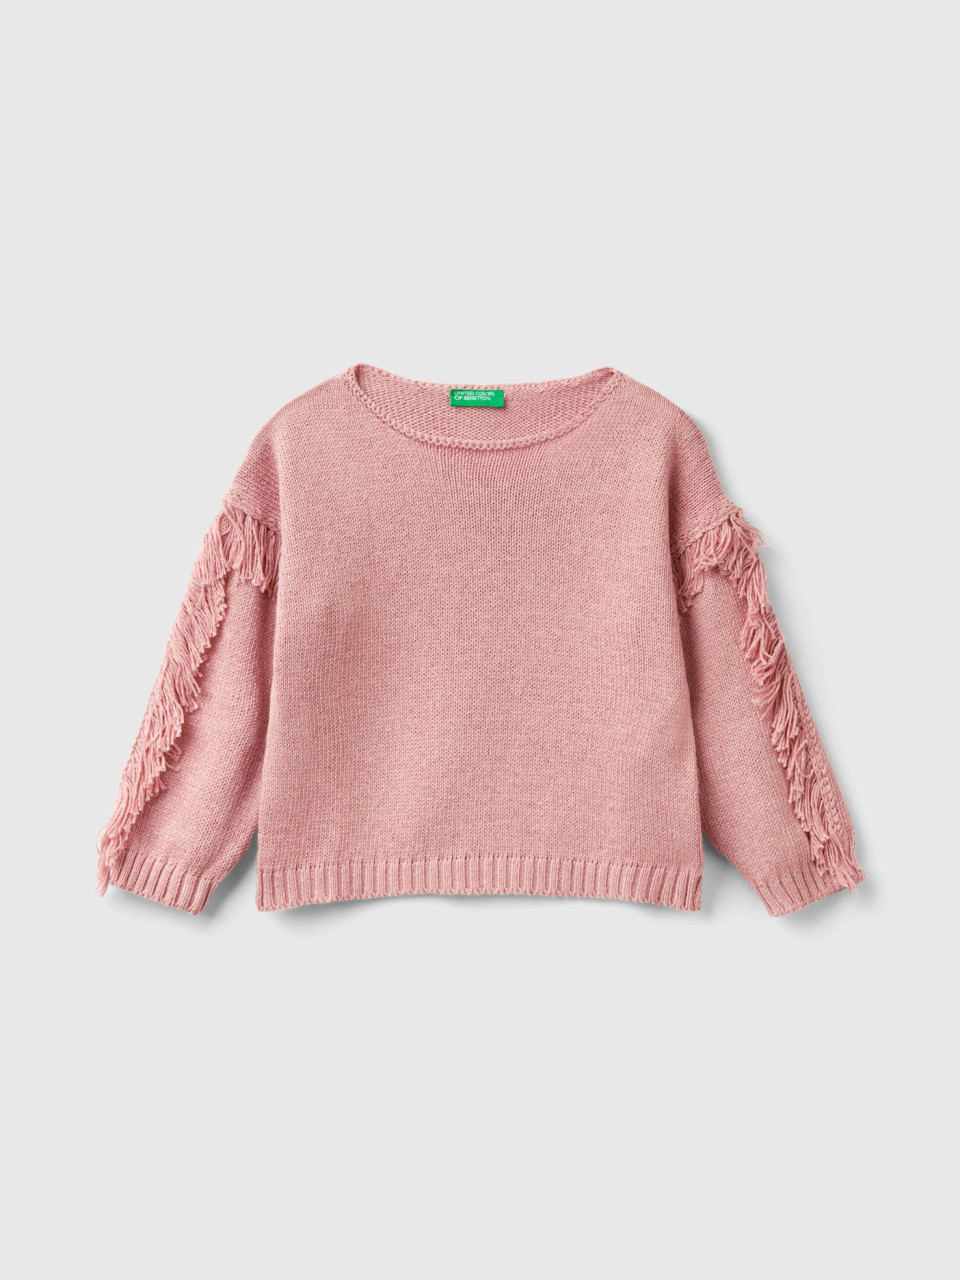 Benetton, Sweater With Fringe, Pink, Kids